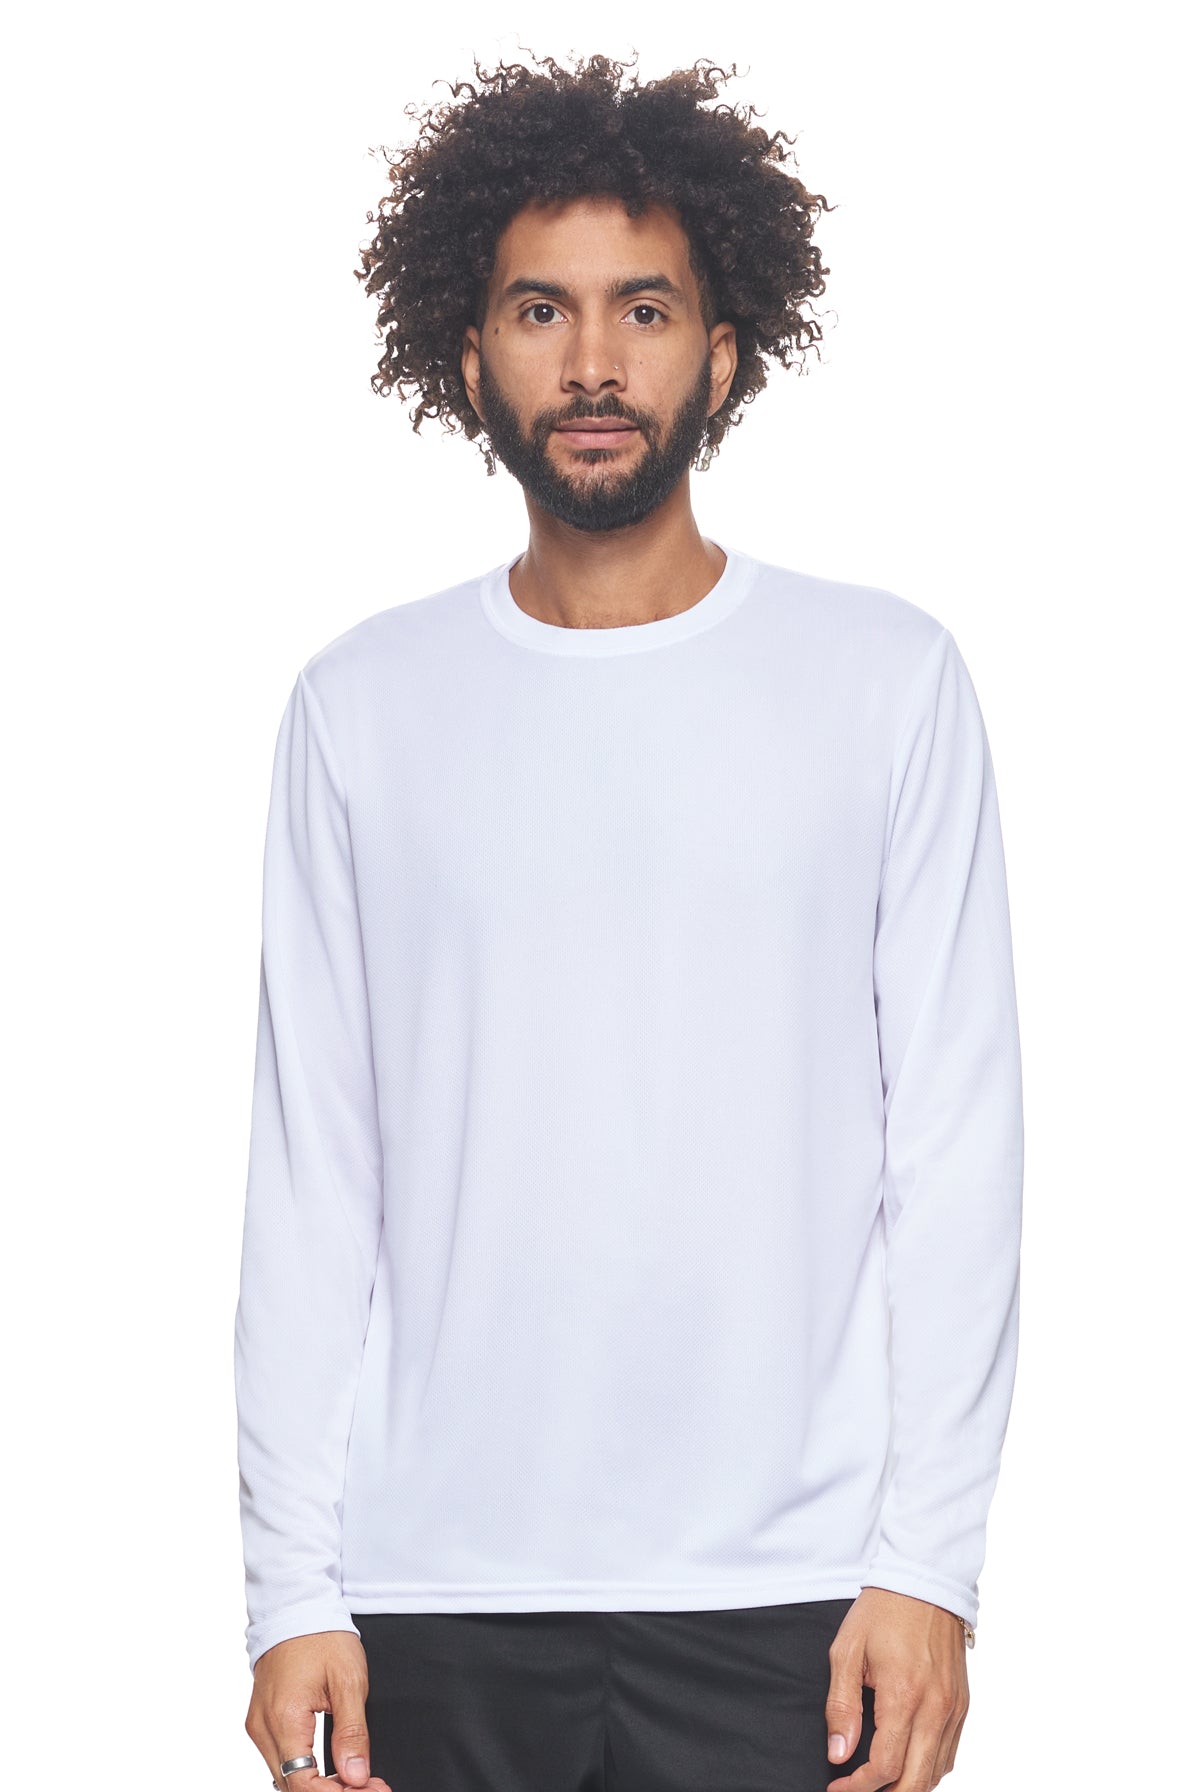 Expert Brand Retail Made in USA sportswear activewear long sleeve tec tee oxymesh crewneck white#color_white